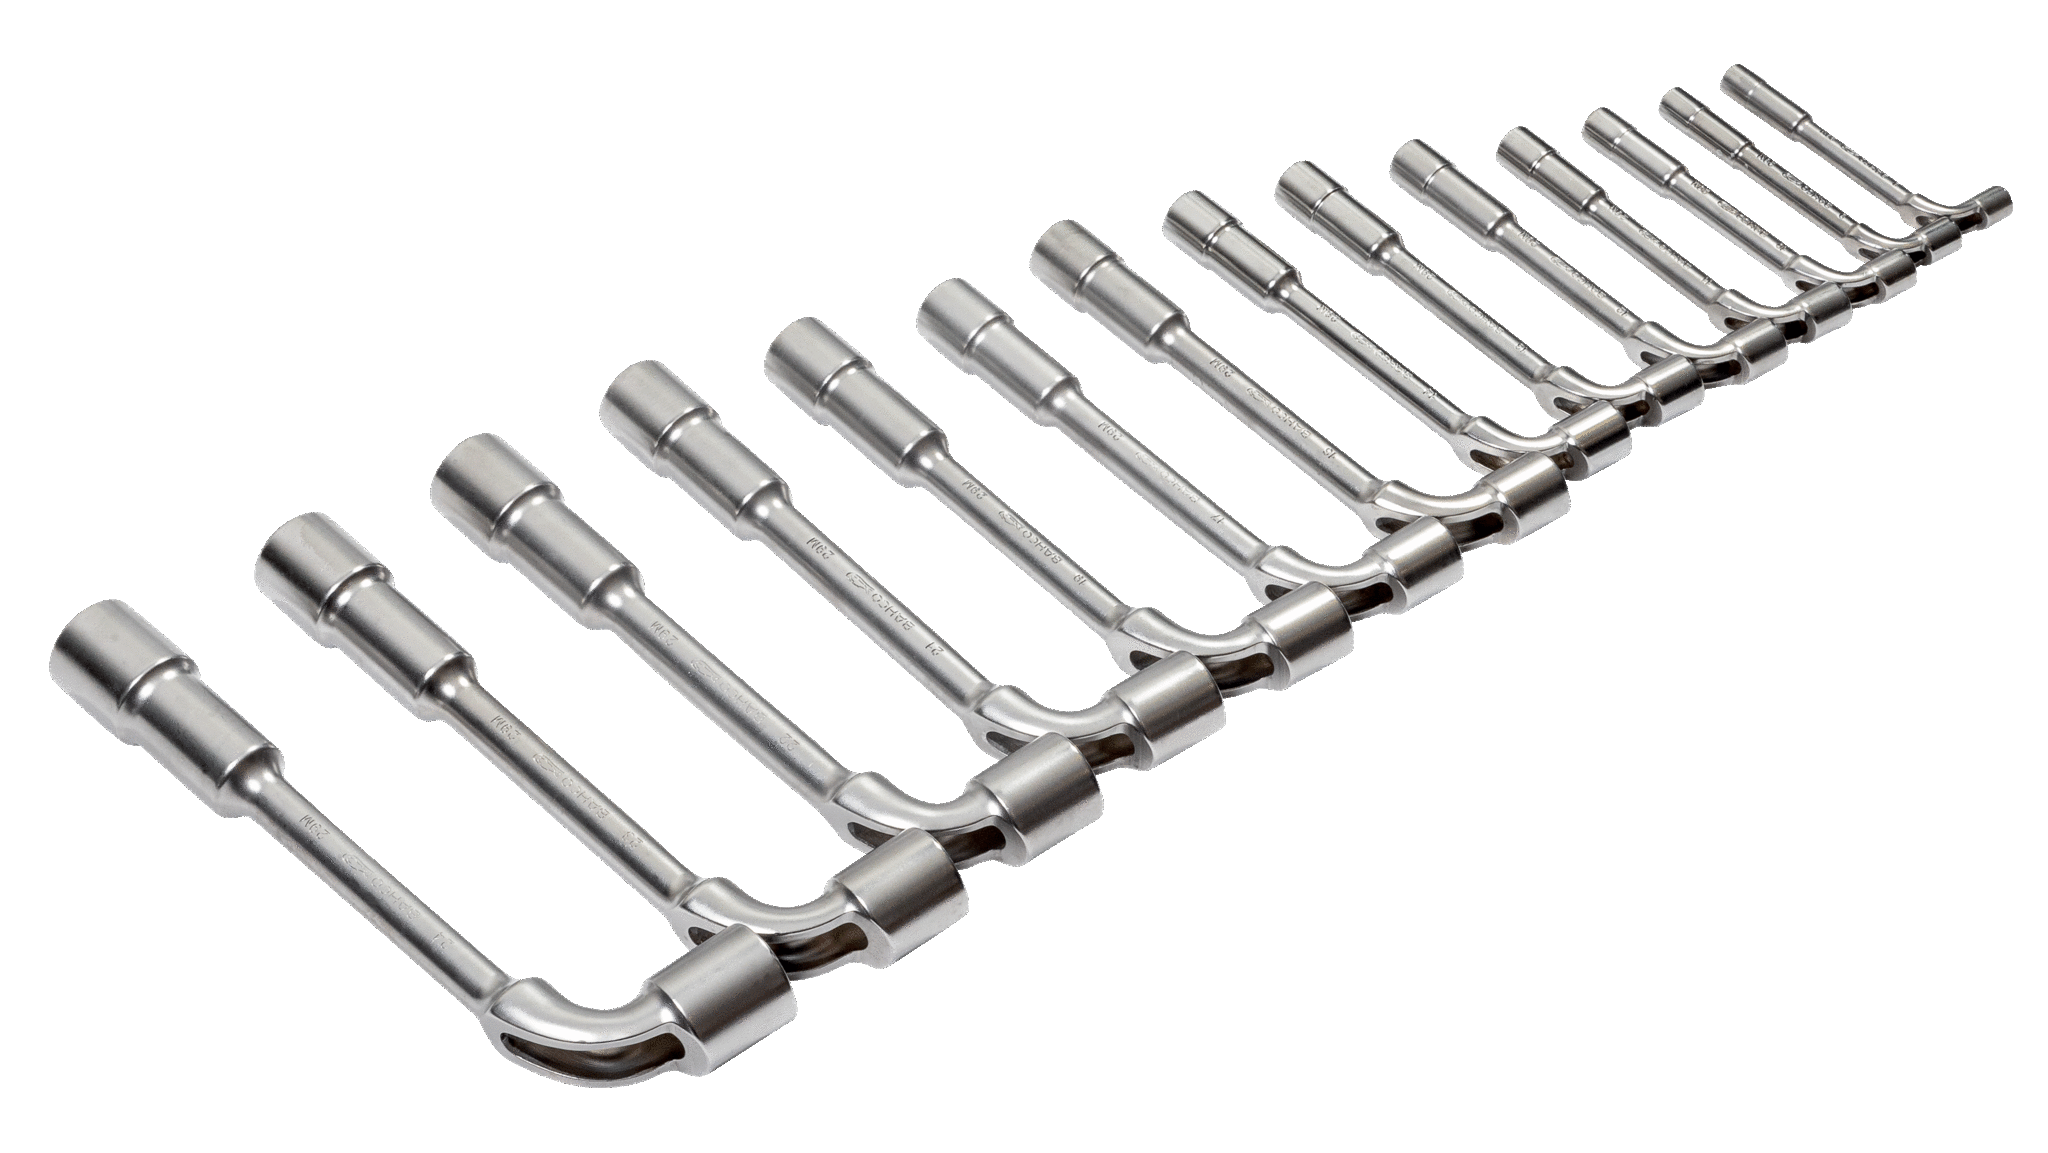 BAHCO 29M/14 Metric Double Head Offset Socket Wrench Set 6 X 6 - Premium Socket Wrench Set from BAHCO - Shop now at Yew Aik.